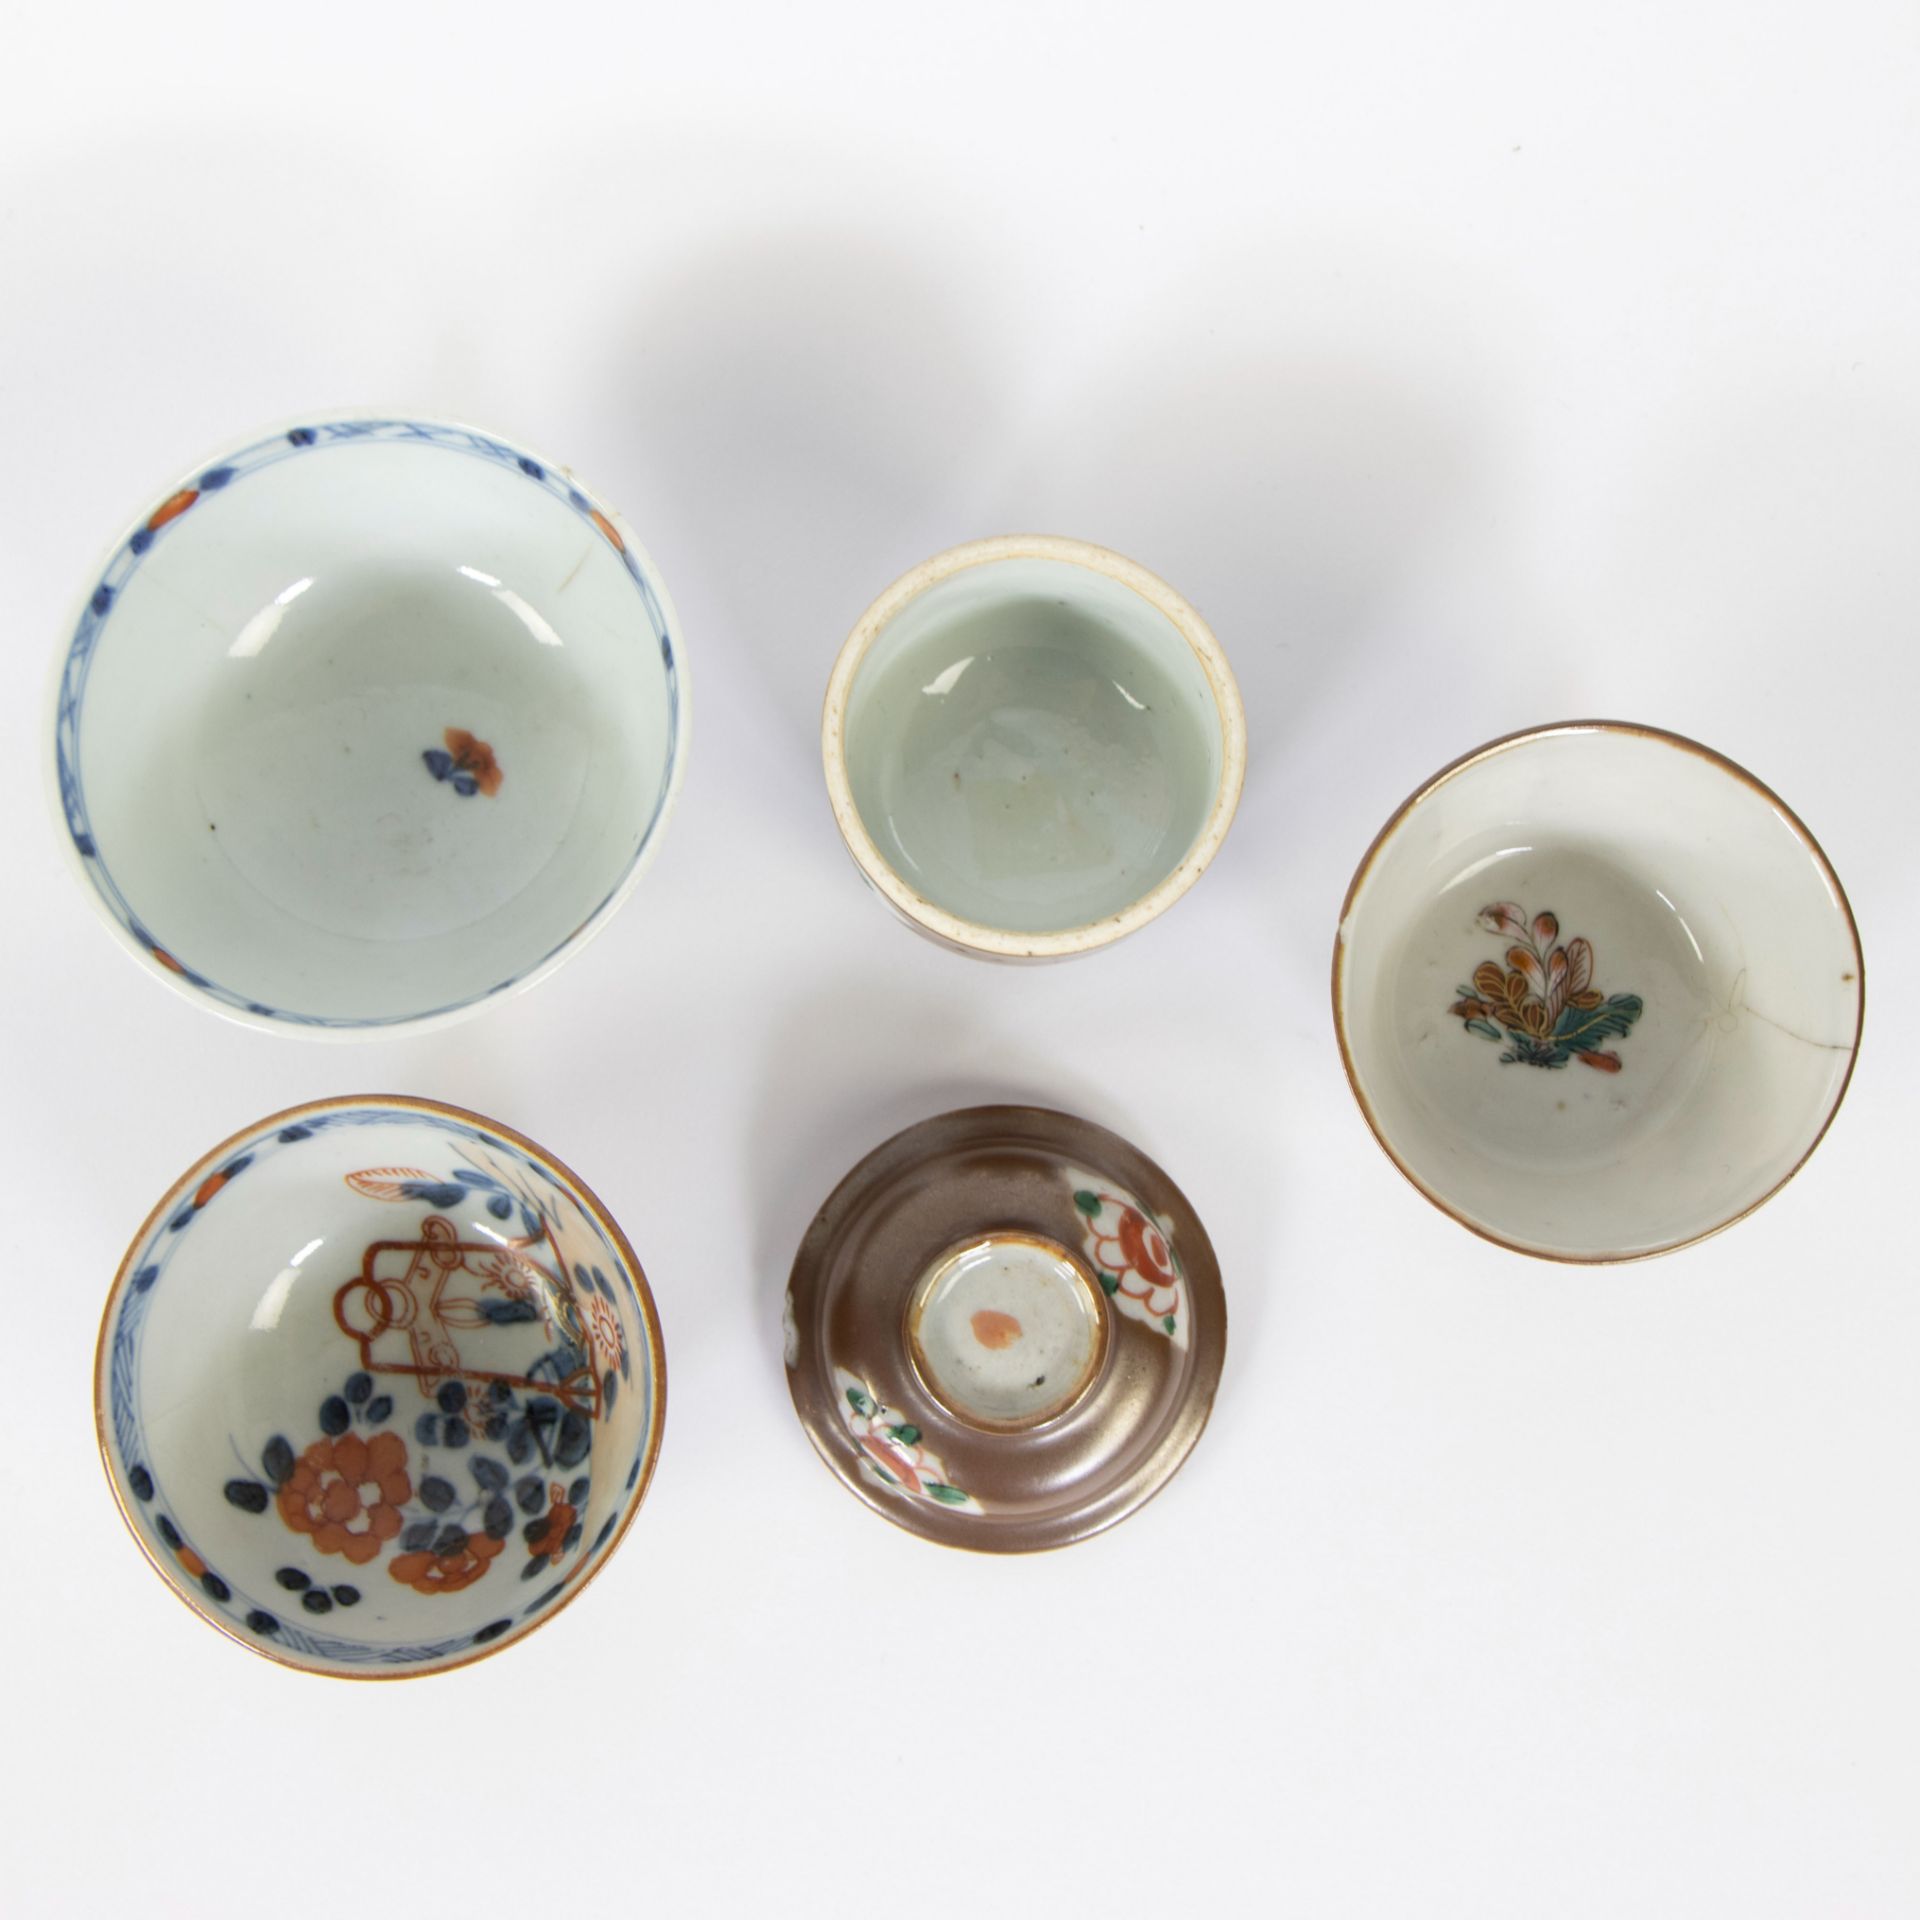 A set of Chinese batavia brown cups and saucers, one Imari cup and 2 plates blue/white, 18th C. - Image 8 of 11